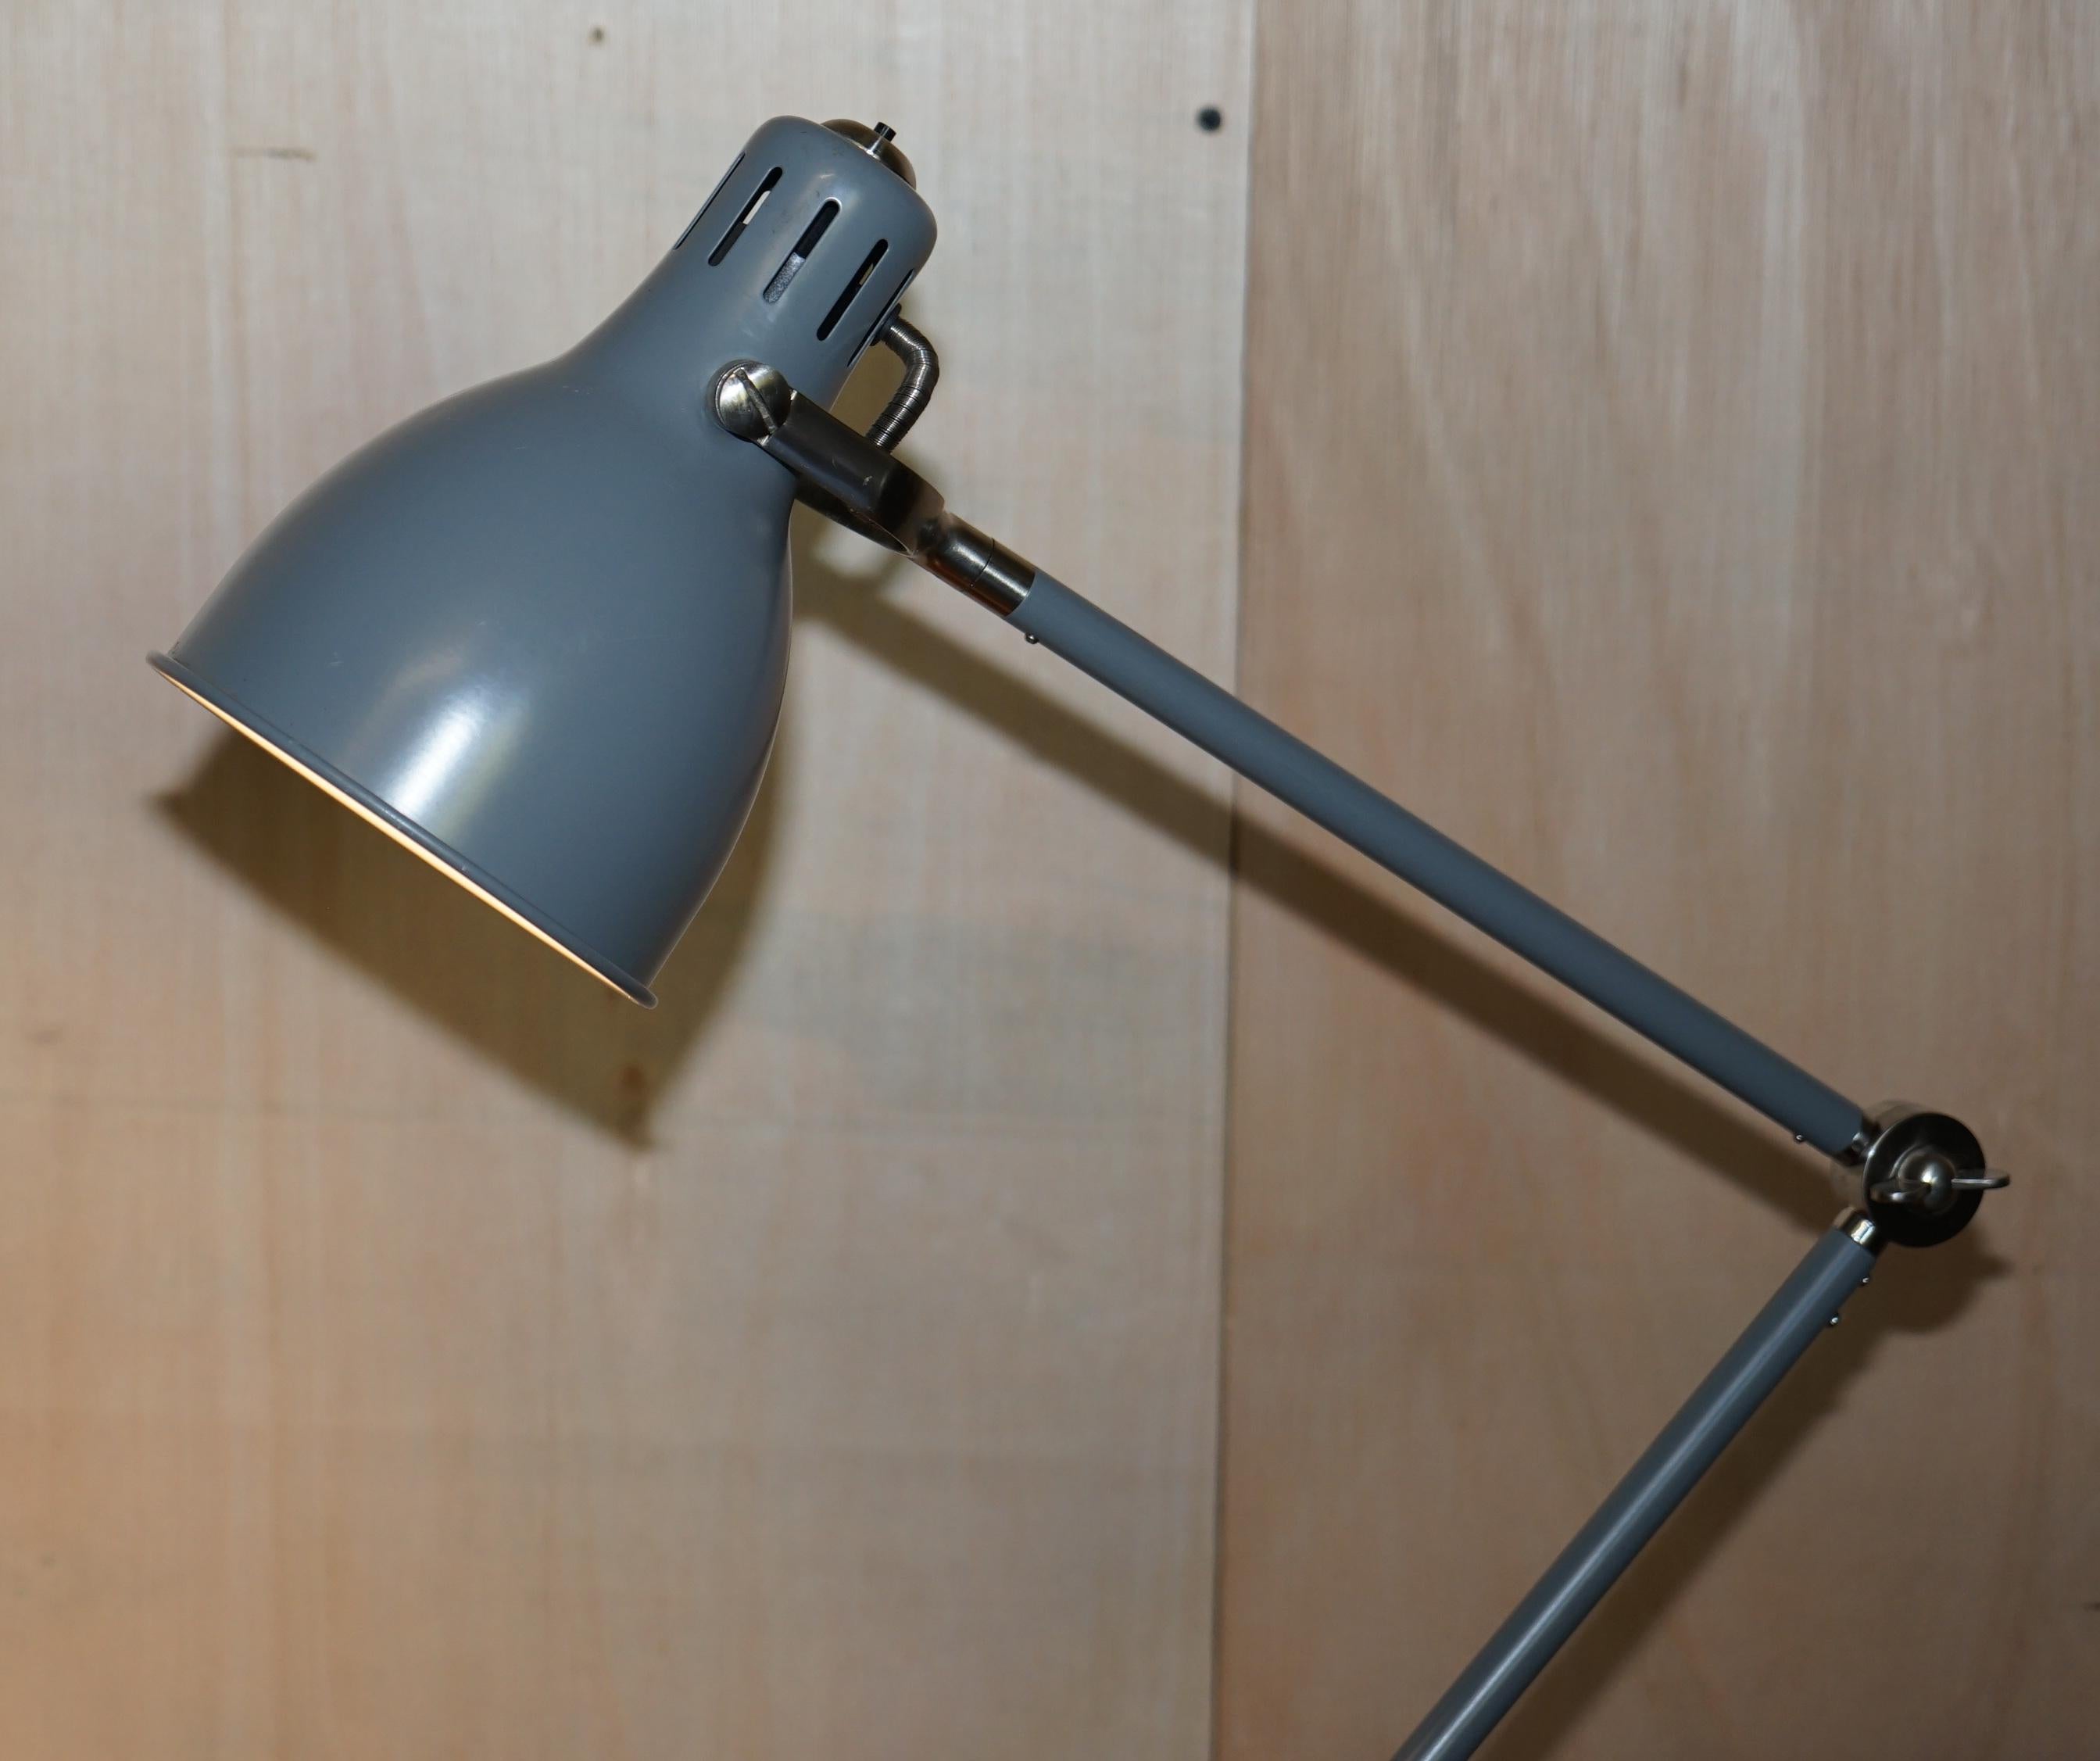 We are delighted to offer for sale this lovely vintage industrial style Articulated Anglepoise swivel table lamp

A good looking well made and decorative piece, the lamp rotates, has three points of articulation meaning you can adjust the height,